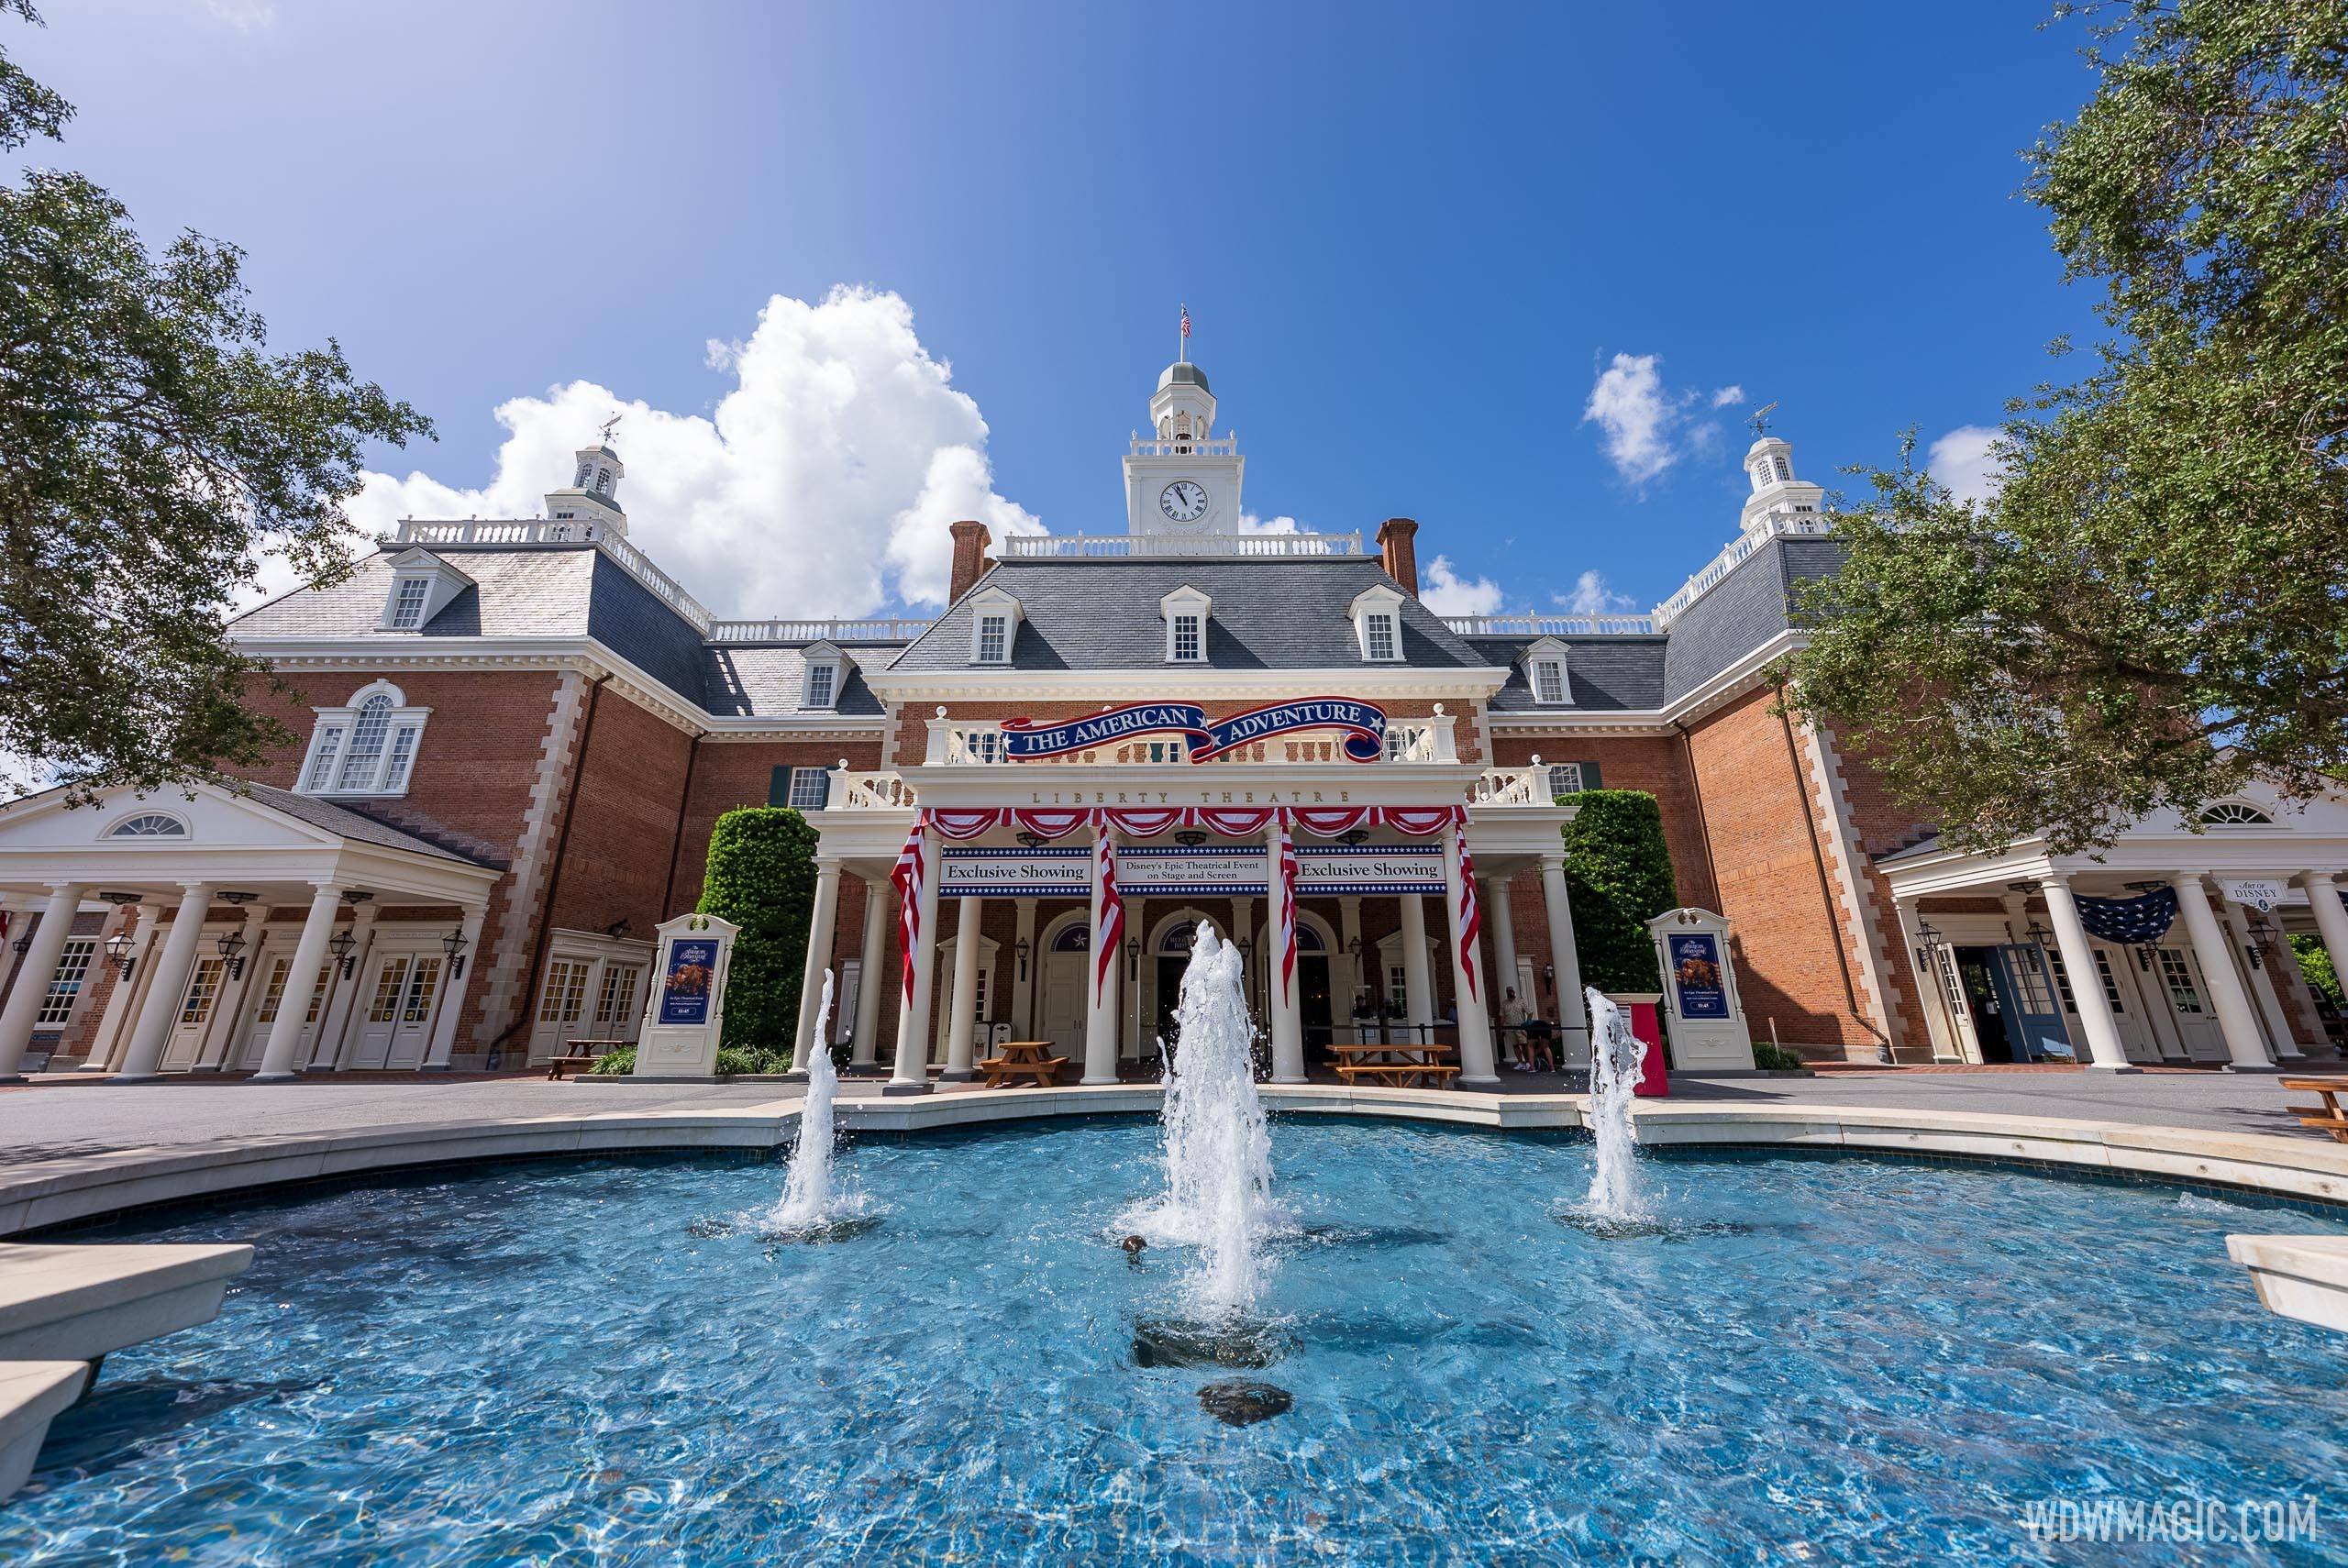 The American Adventure pavilion is home to the Voices of Liberty